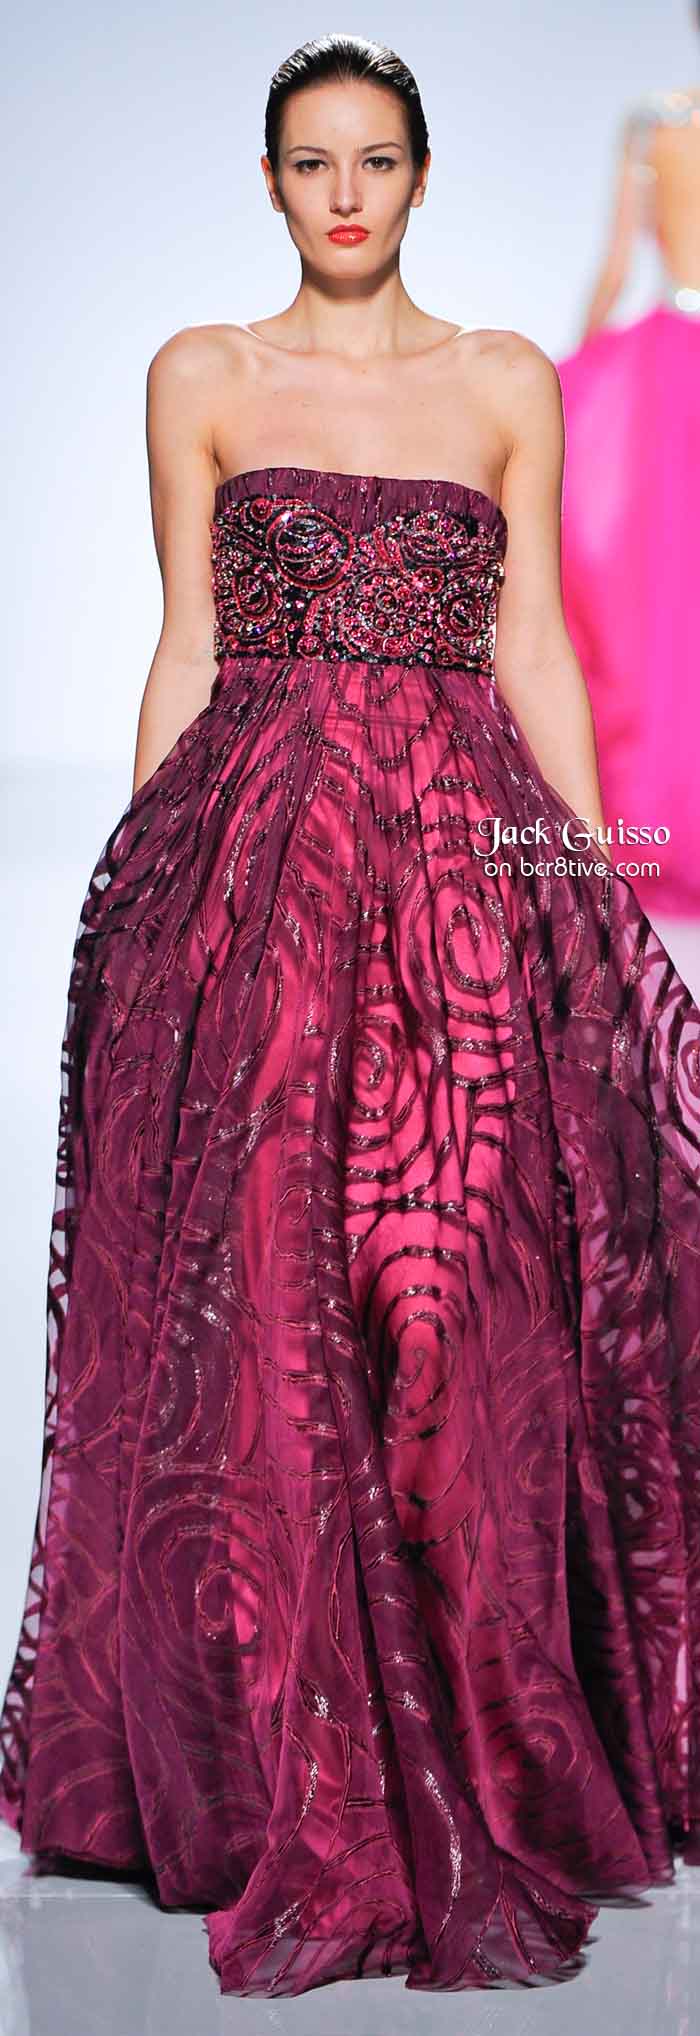 Jack Guisso Spring 2011 Couture